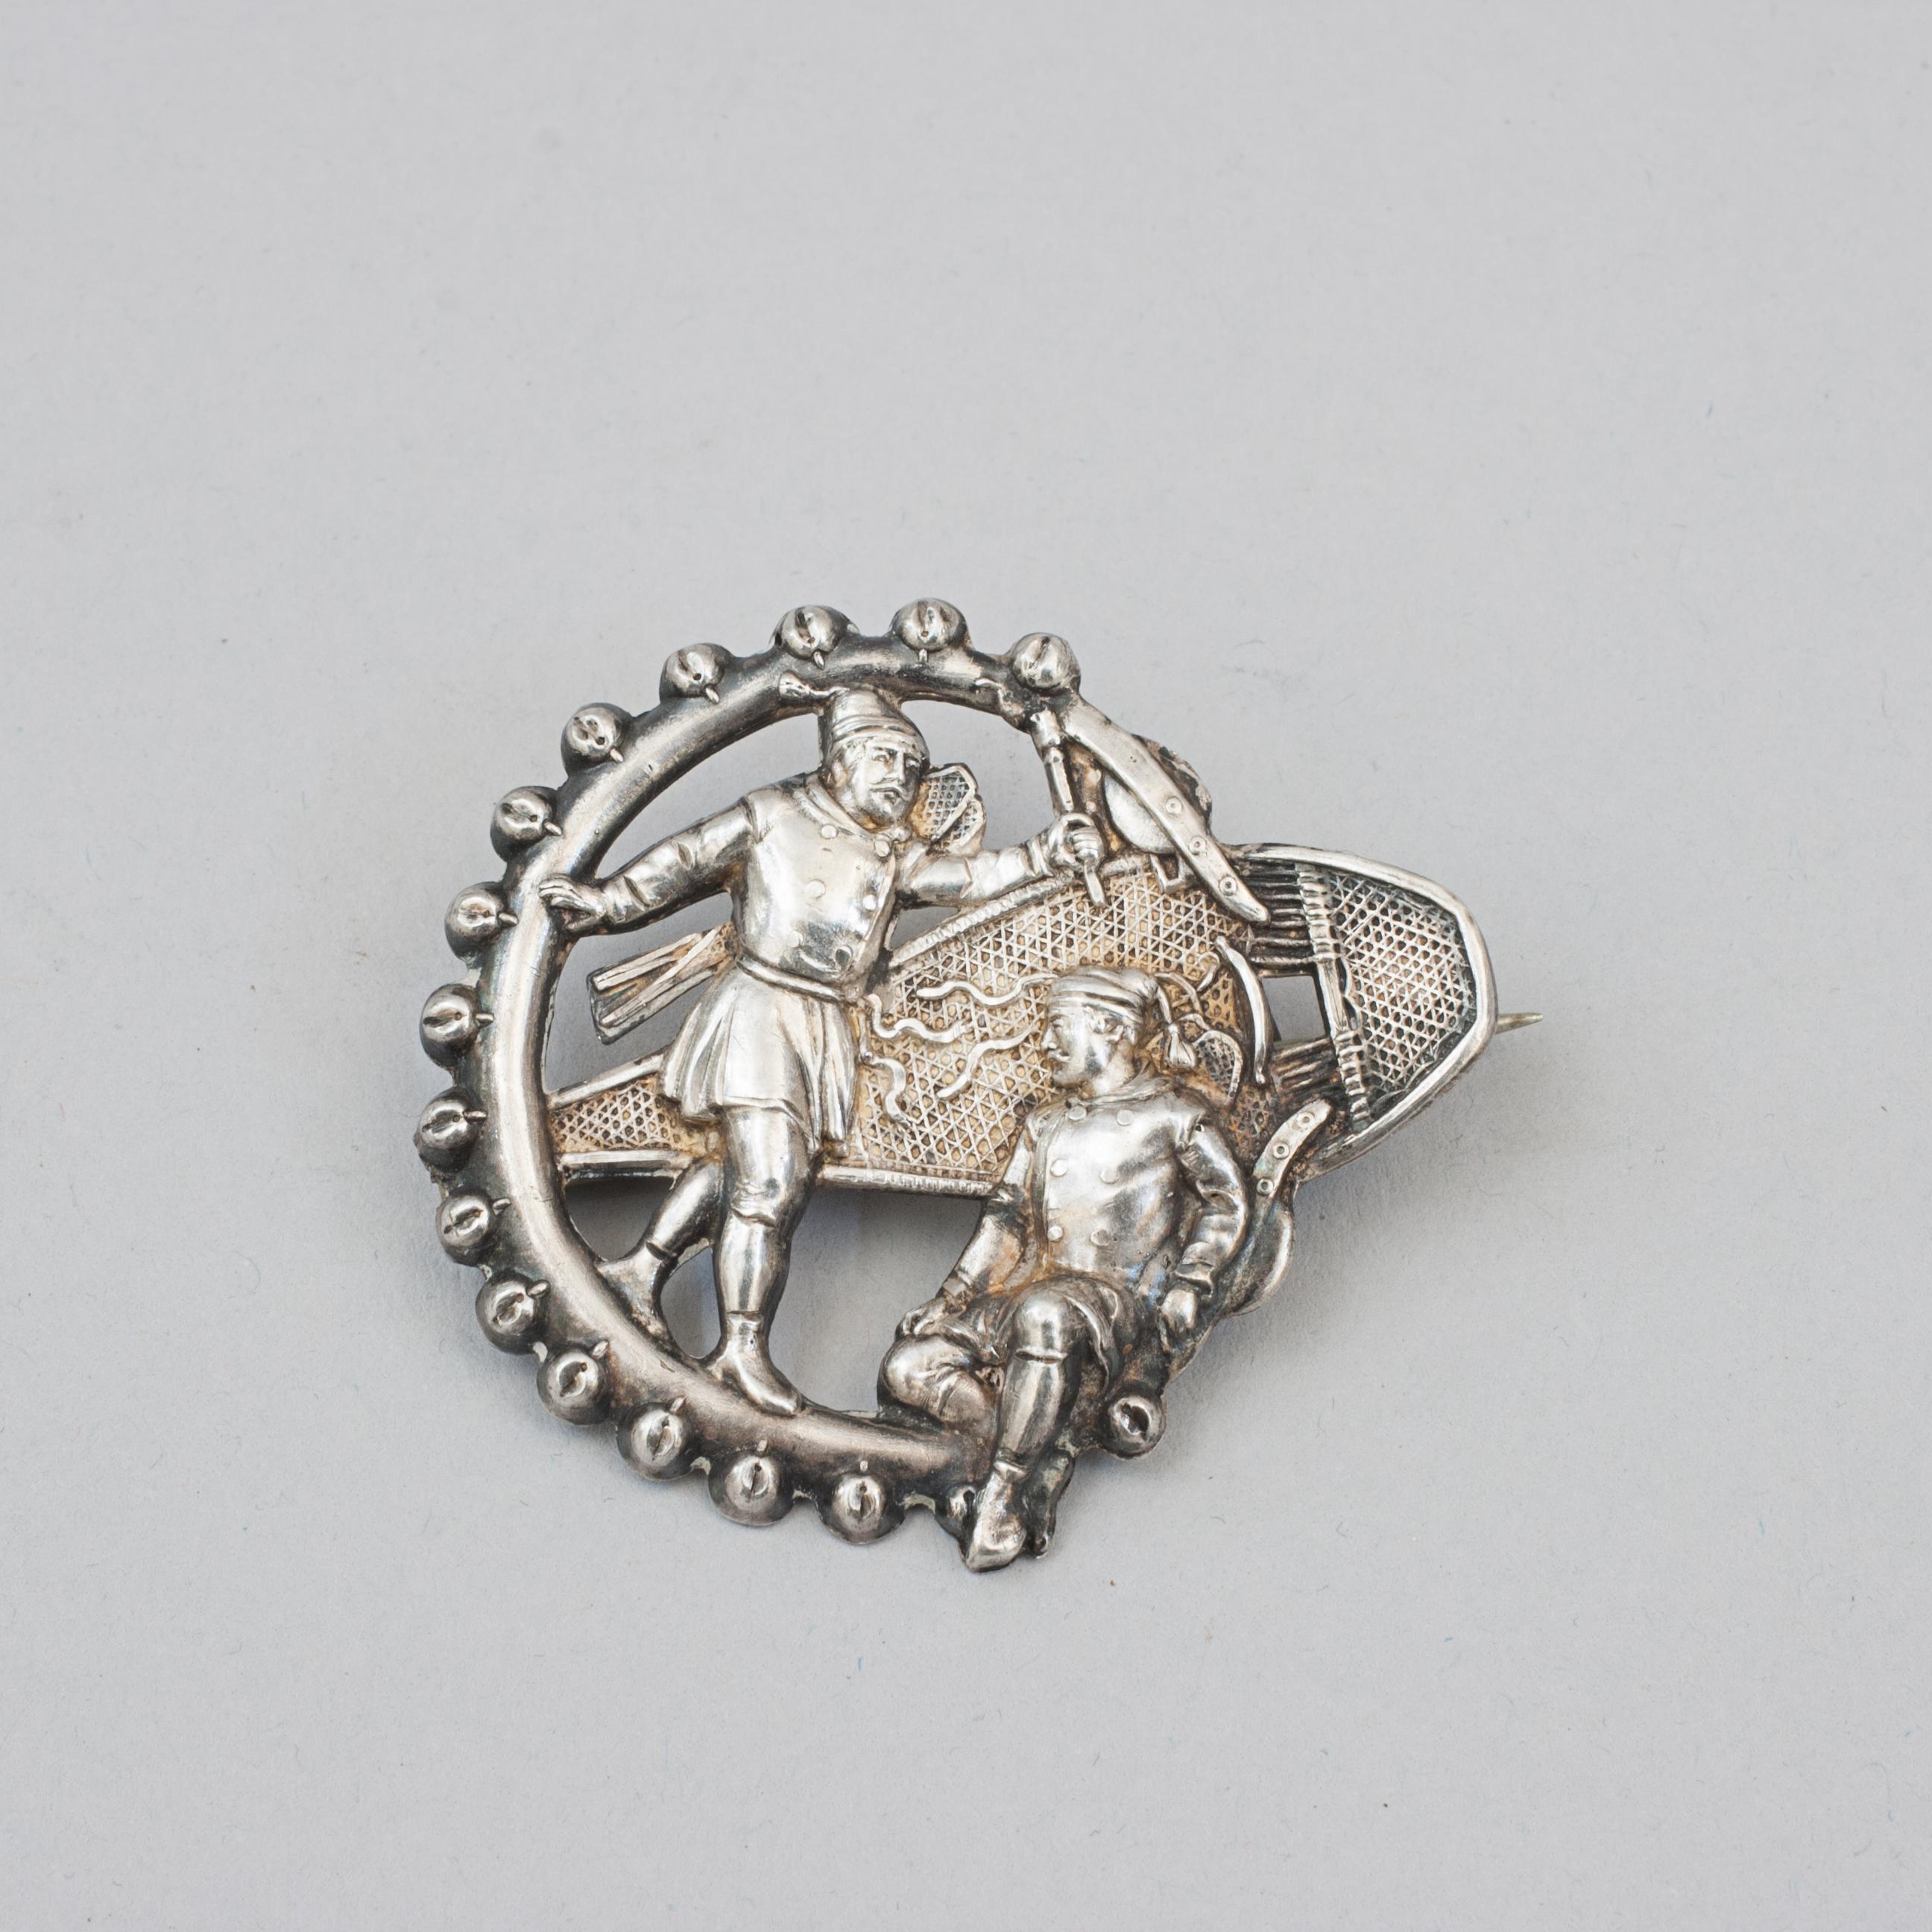 Snowshoe Brooch Or Pin.
A very nice piece of antique winter themed jewellery, a broach in the form of a snowshoe with two gentlemen. The surround is in the form of a leather strand with sleigh bells attached to it. The rear has a clasp and is